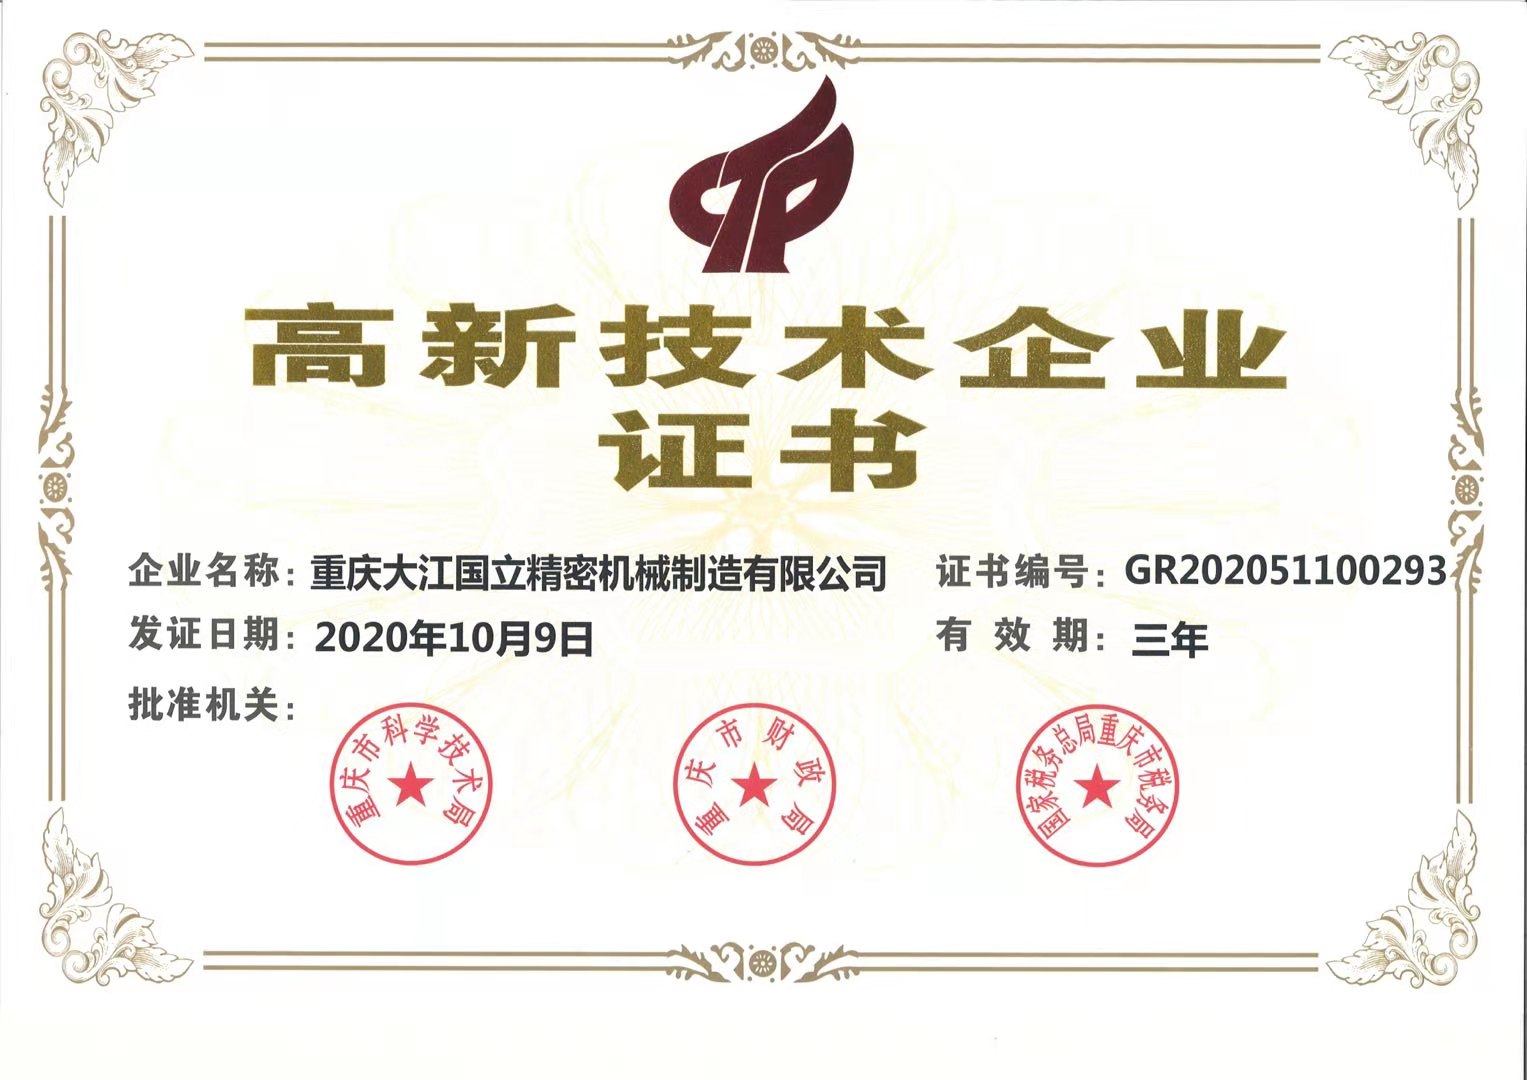 Warmly congratulate our holding subsidiary Dajiang Guoli on passing the certification of high-tech enterprise!